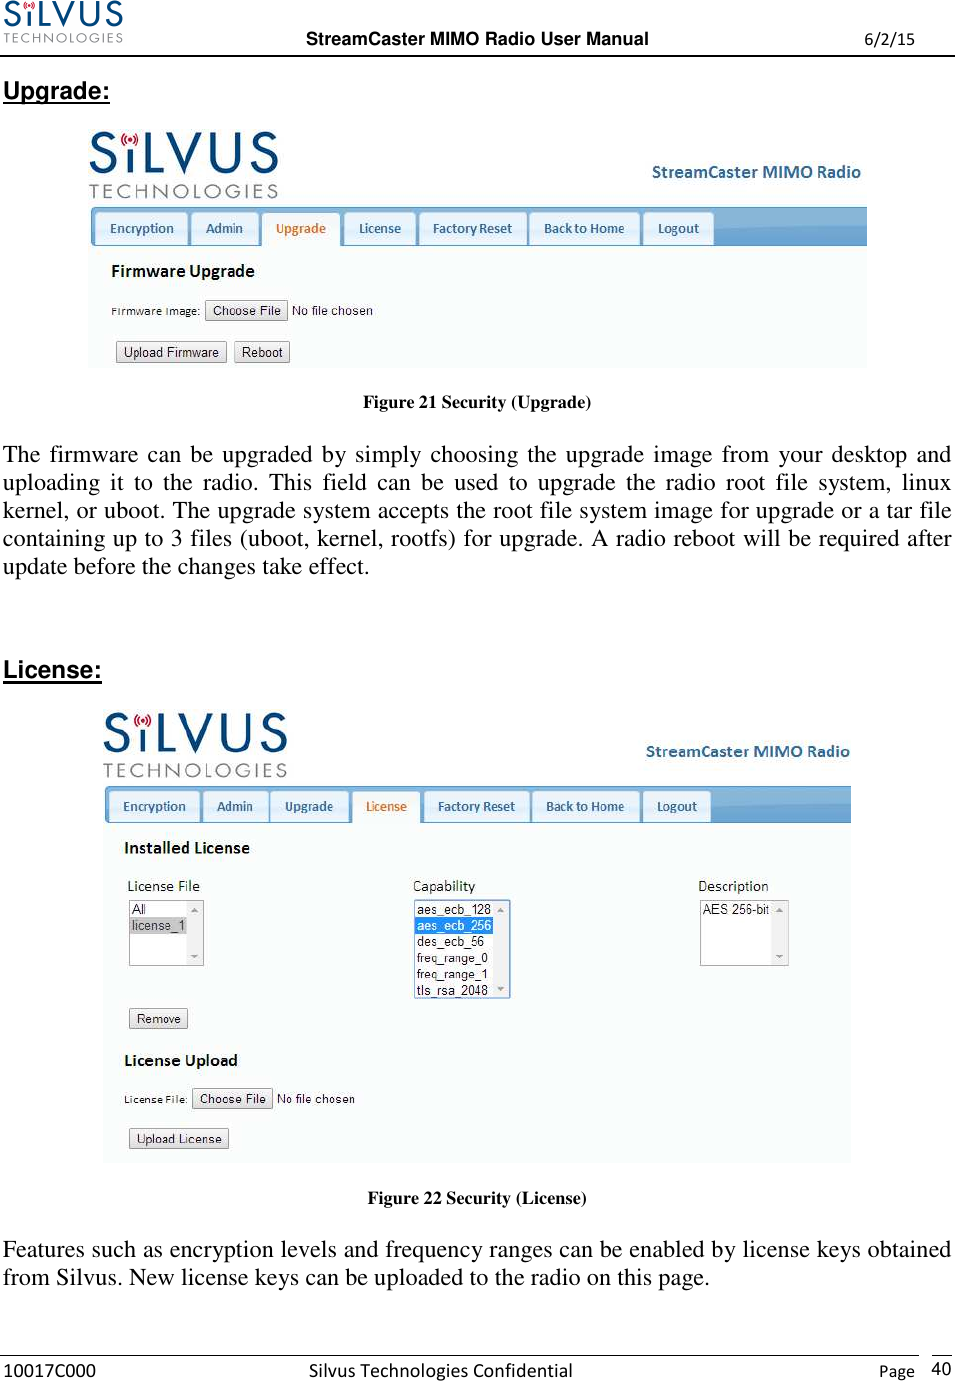  StreamCaster MIMO Radio User Manual  6/2/15 10017C000 Silvus Technologies Confidential    Page   40 Upgrade:  Figure 21 Security (Upgrade) The firmware can be upgraded by simply choosing the upgrade image from your desktop and uploading  it  to  the  radio.  This  field  can  be  used  to  upgrade  the  radio  root  file  system,  linux kernel, or uboot. The upgrade system accepts the root file system image for upgrade or a tar file containing up to 3 files (uboot, kernel, rootfs) for upgrade. A radio reboot will be required after update before the changes take effect.  License:  Figure 22 Security (License) Features such as encryption levels and frequency ranges can be enabled by license keys obtained from Silvus. New license keys can be uploaded to the radio on this page.  